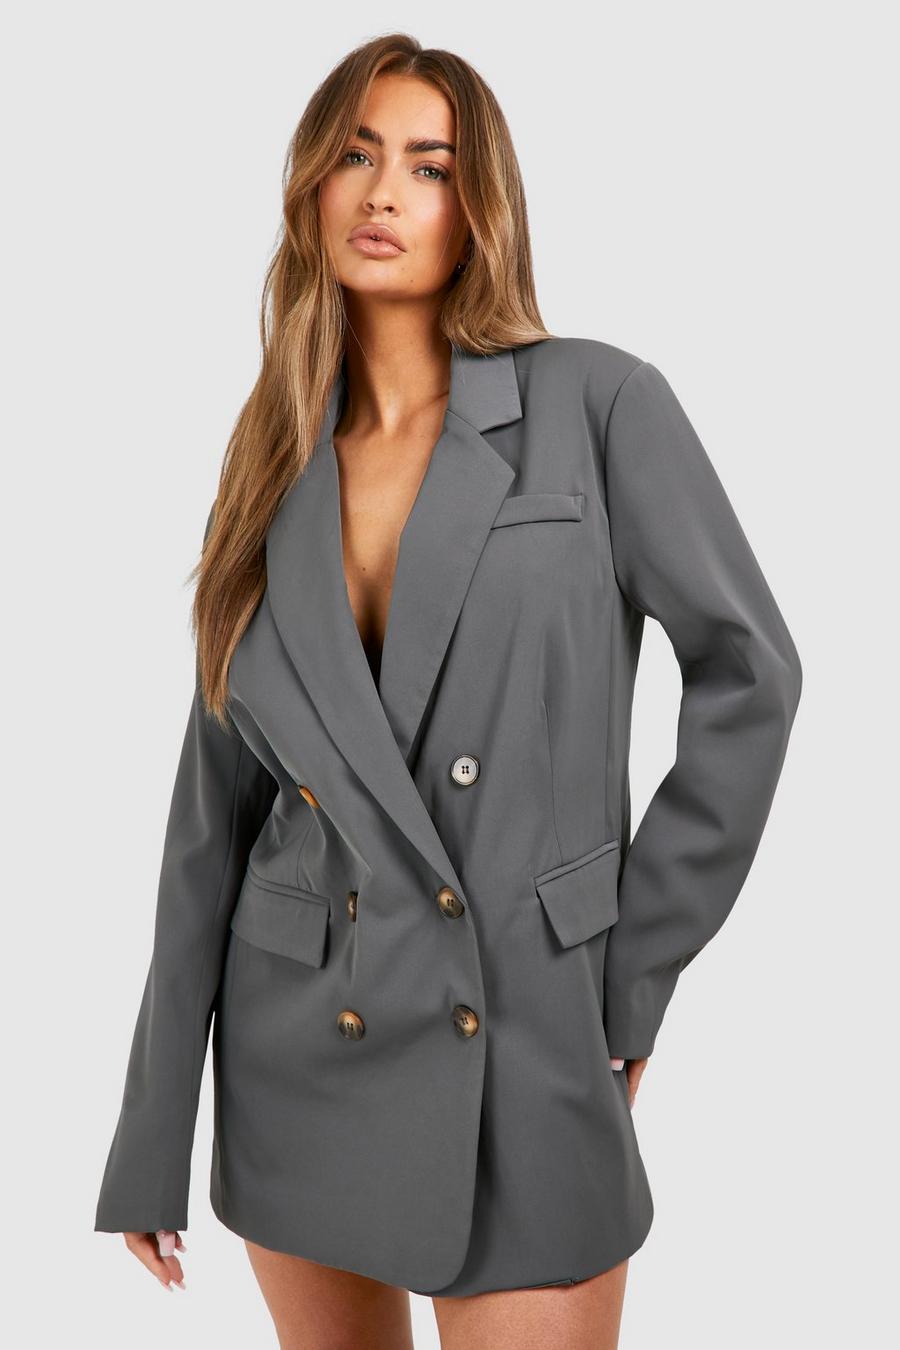 Charcoal grå Double Breasted Mansy Blazer Dress